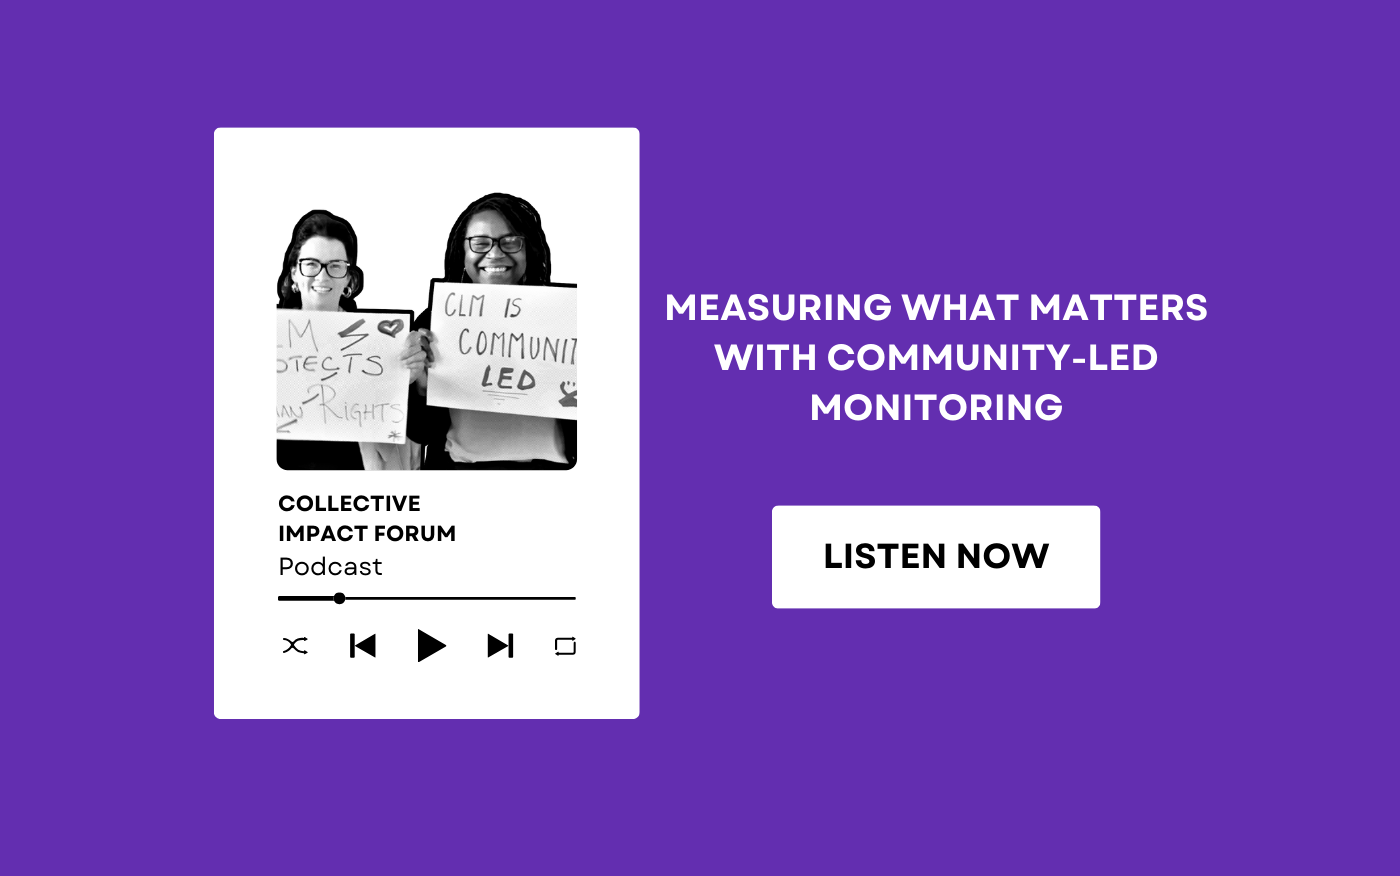 [Podcast] Measuring what matters with community-led monitoring